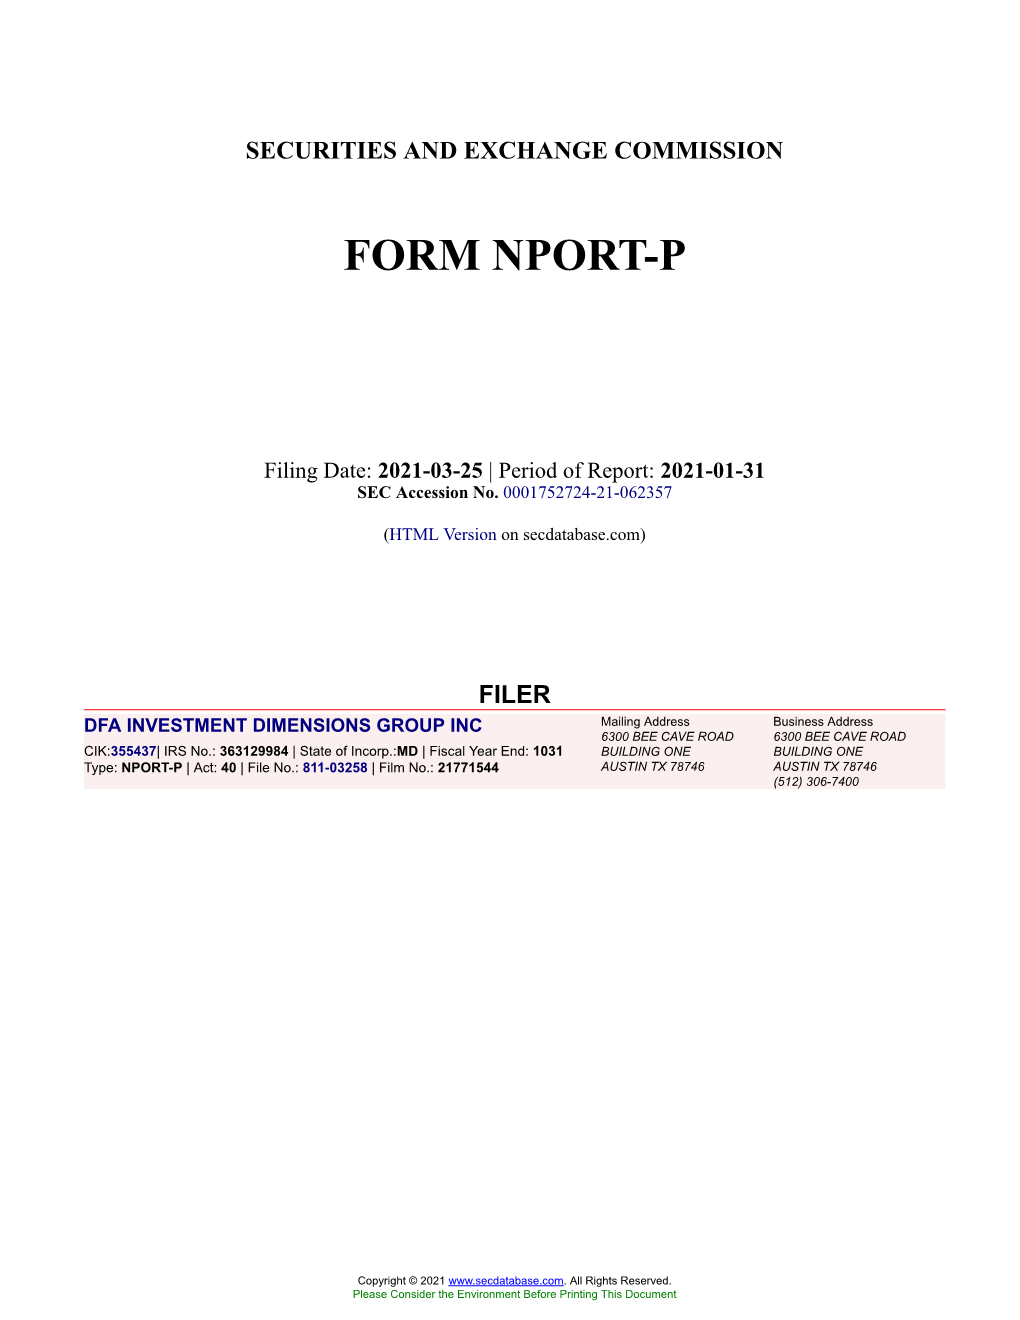 DFA INVESTMENT DIMENSIONS GROUP INC Form NPORT-P Filed 2021-03-25